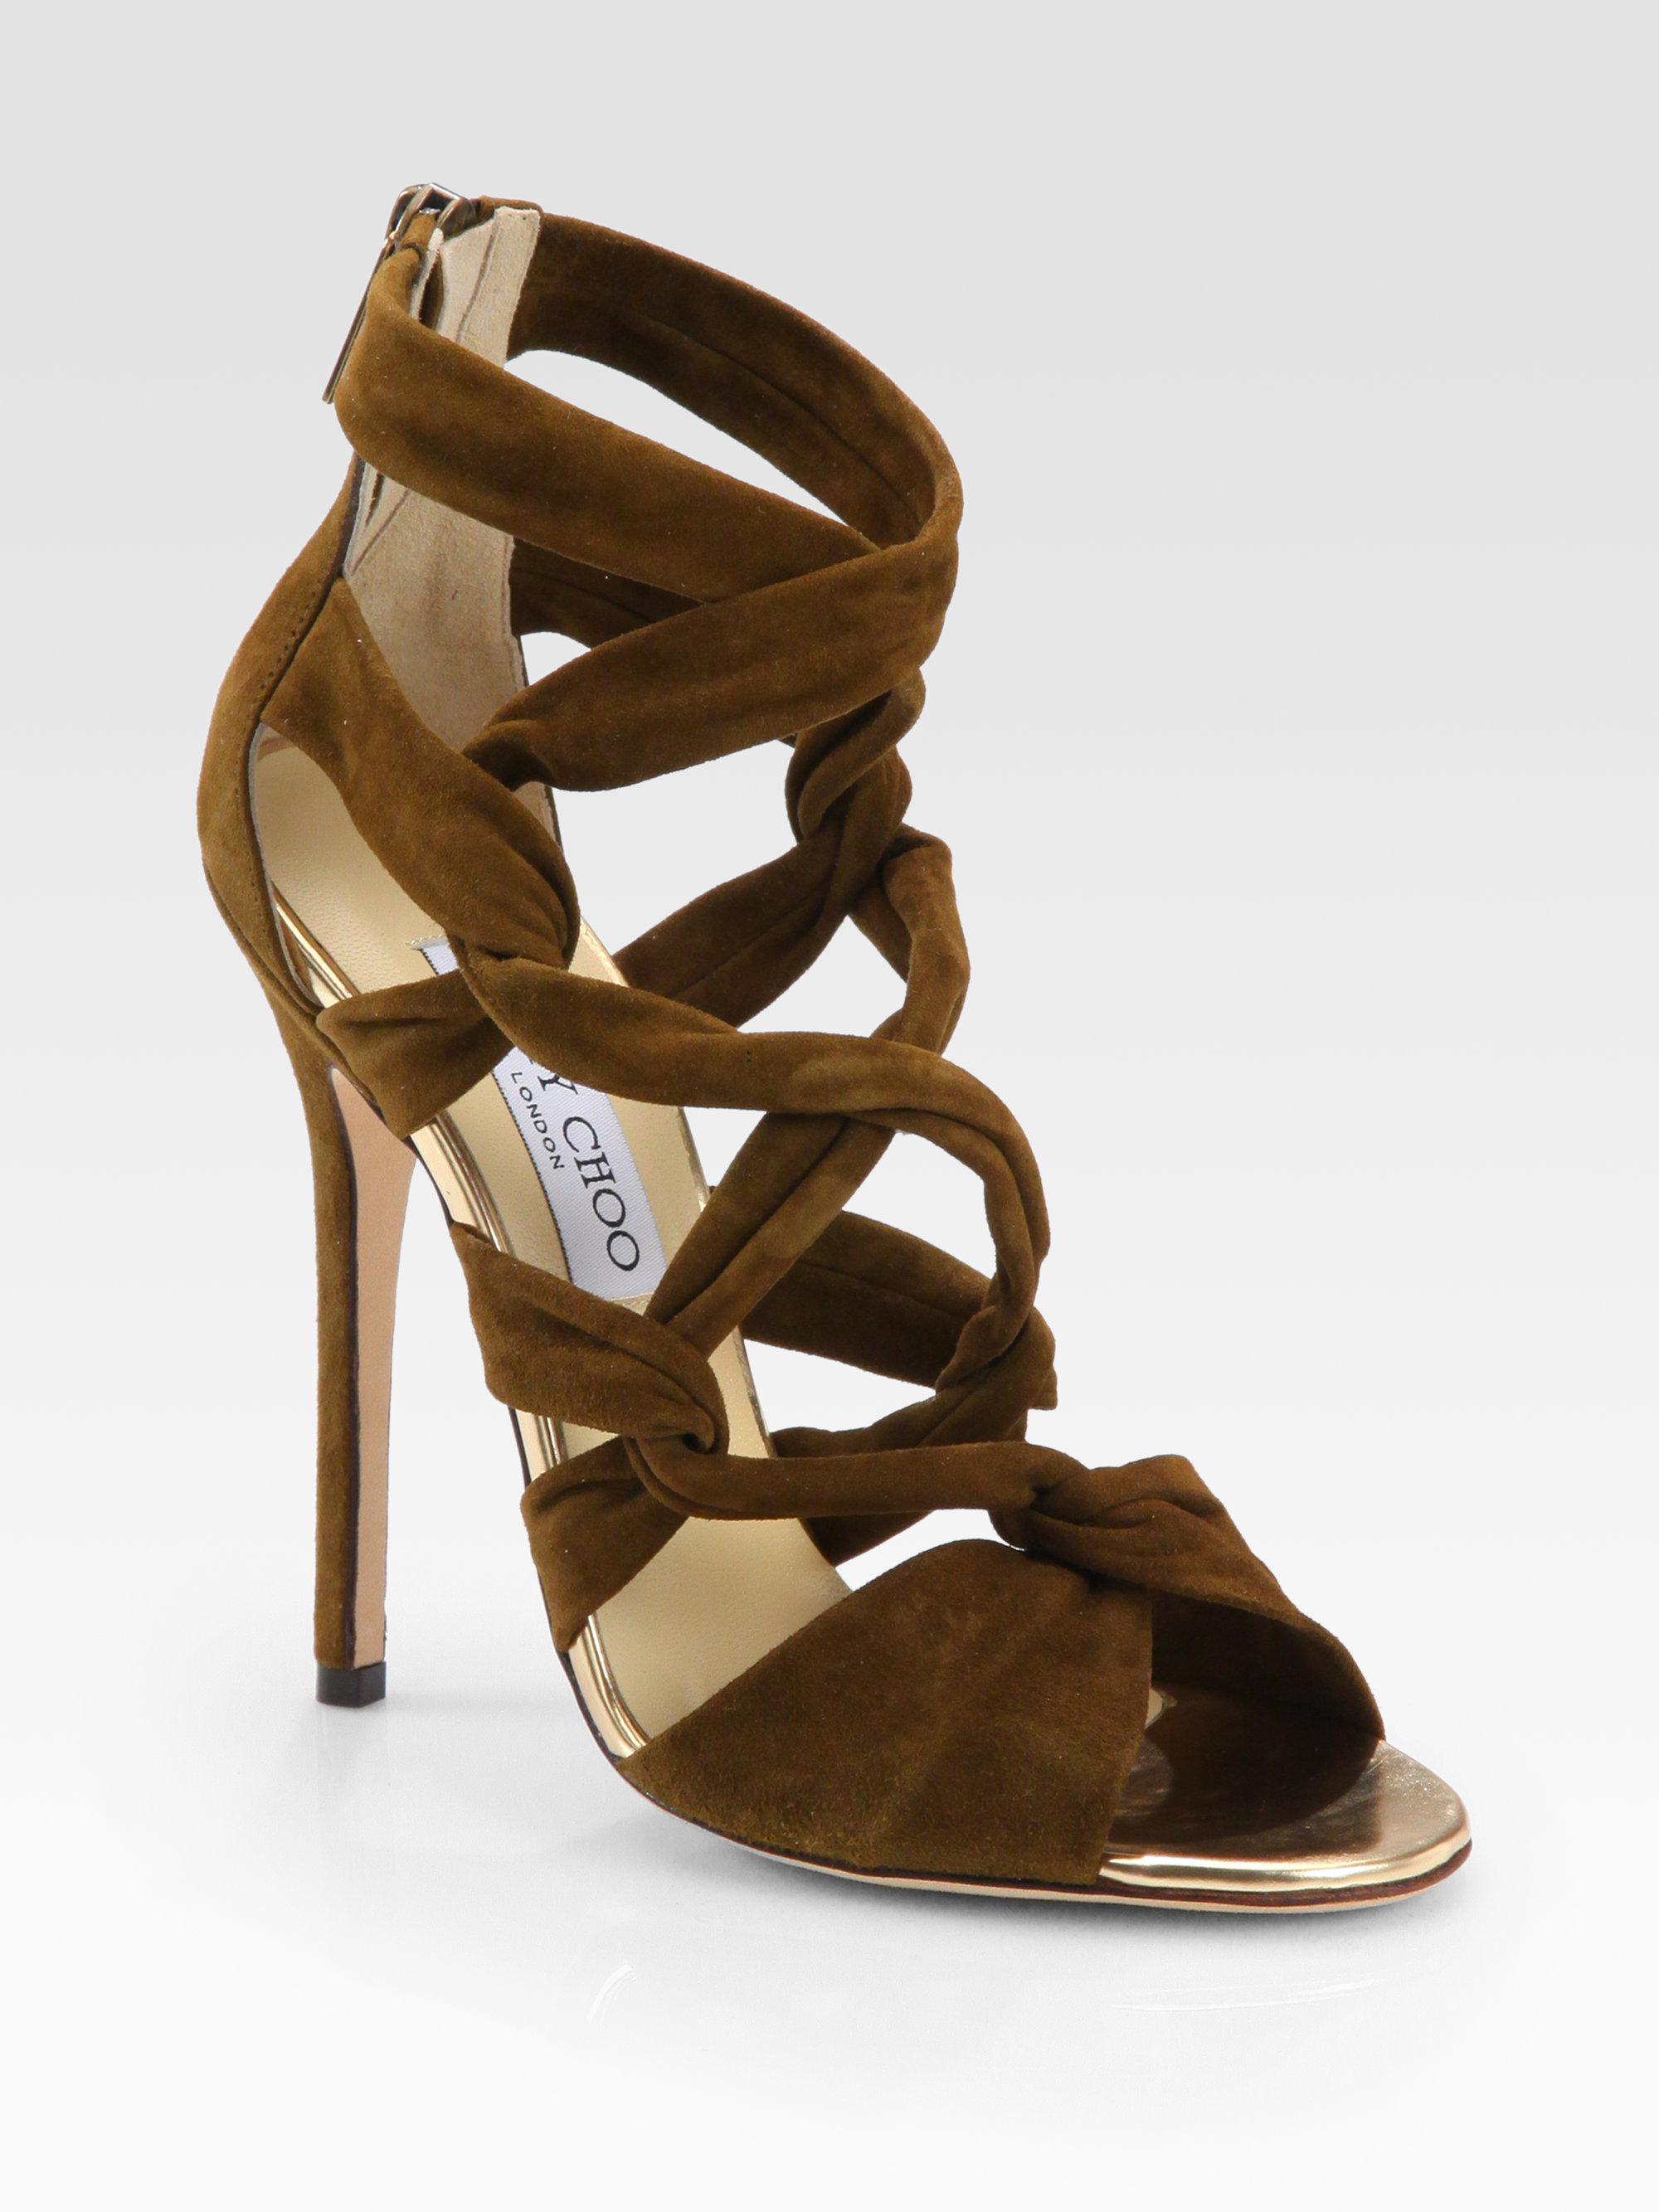 Jimmy Choo Kemble Knotted Suede Sandals in Tobacco (Brown) - Lyst